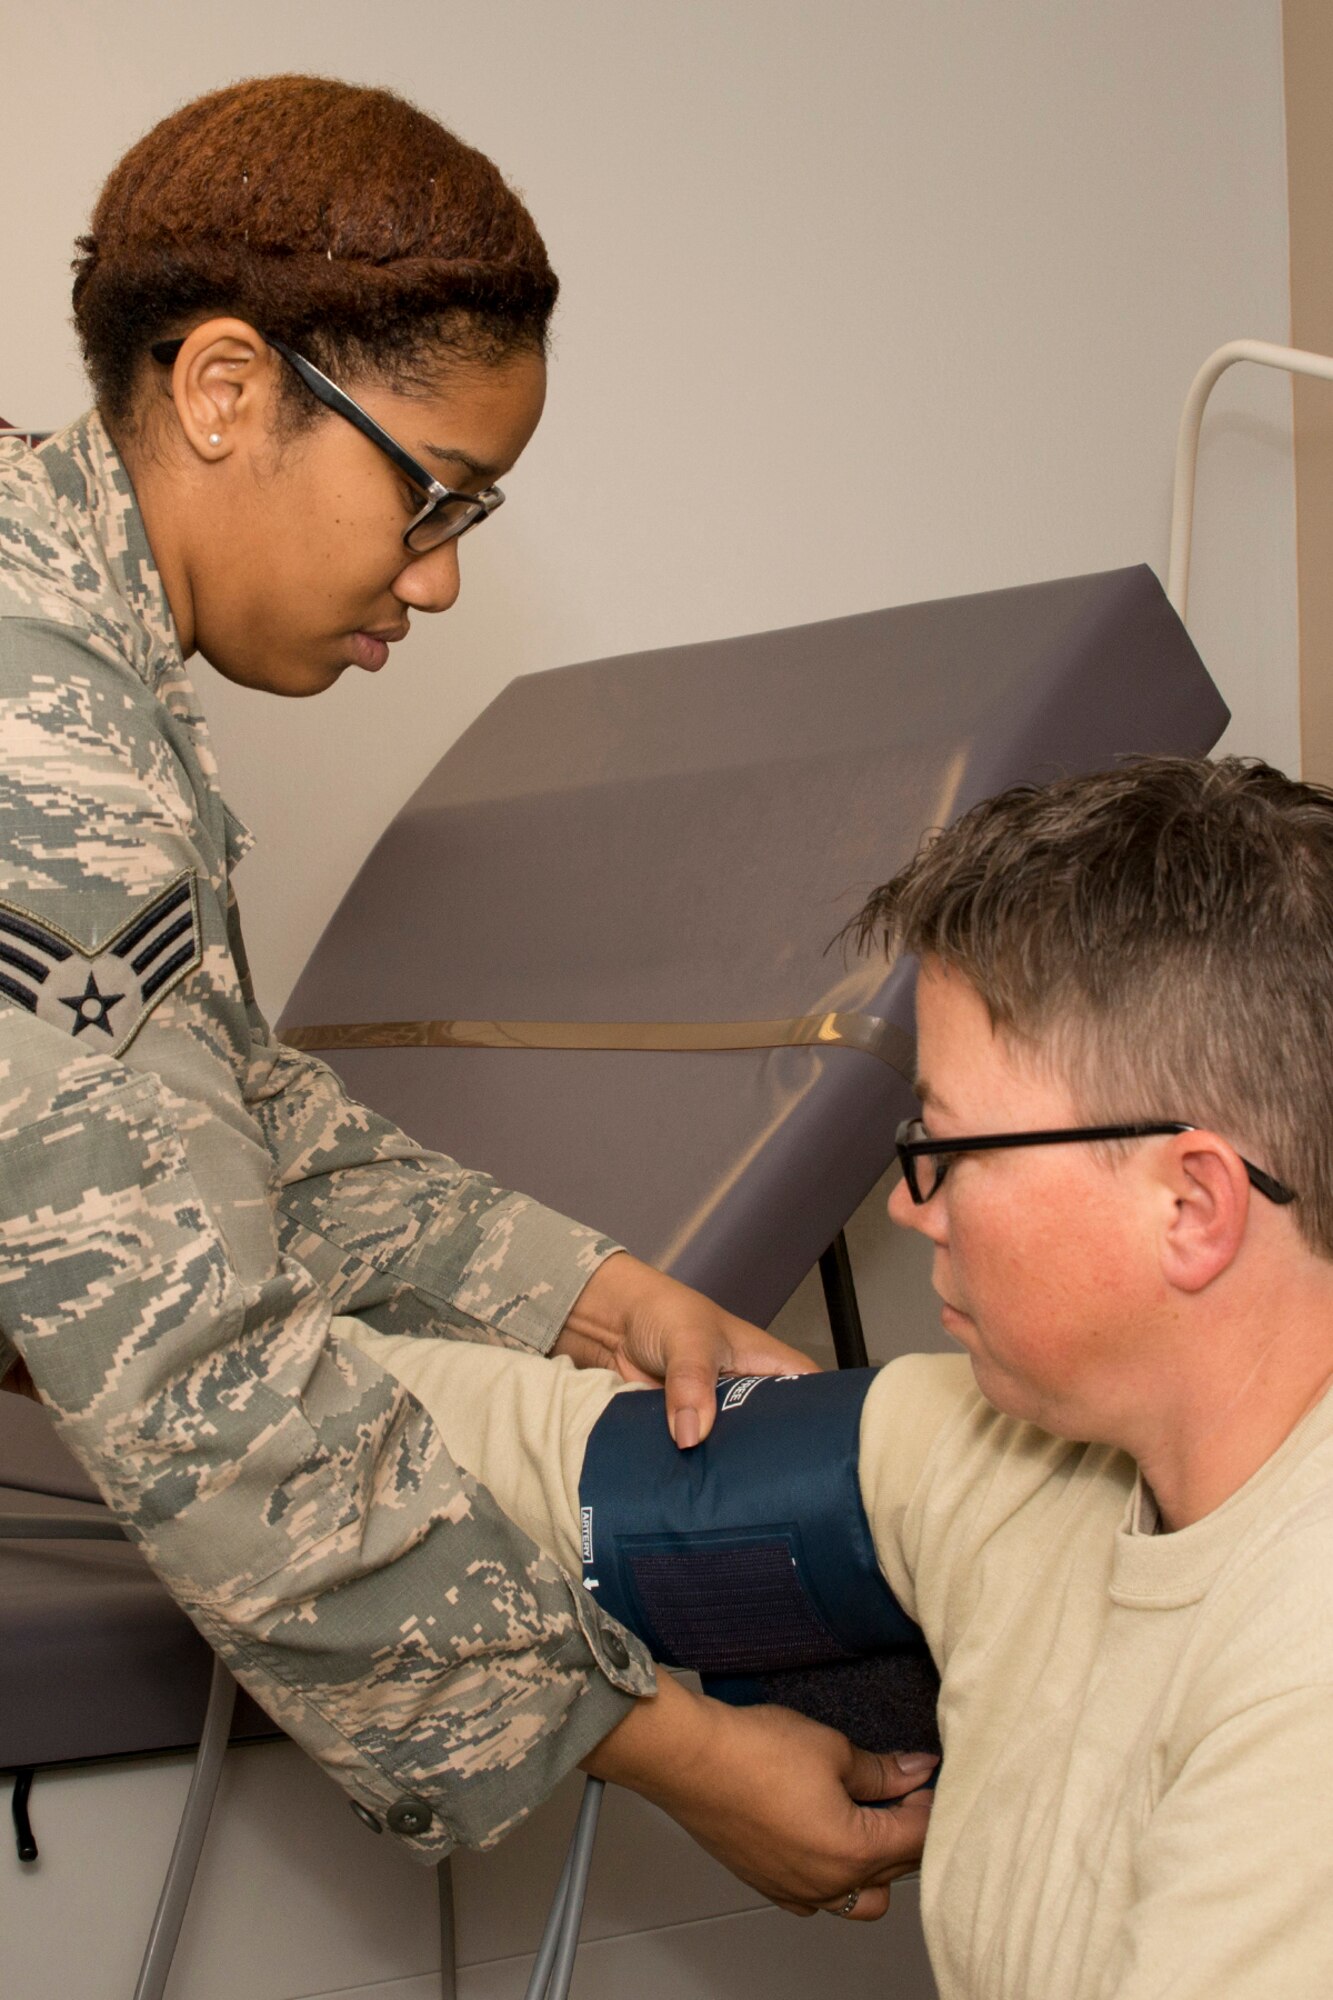 U.S. Air Force Reserve Senior Airman Kyla Mullens, an aerospace medical technician assigned to the 913th Aero Medical Squadron, takes the vital signs of Tech. Sgt. Heather Rudenick, in the medical clinic at Little Rock Air Force Base, Ark, Jan. 9, 2016. Rudenick, an aviation resource management journeyman with the 913th Operations Support Squadron, was taking her annual physical during the January Unit Training Assembly weekend. (U.S. Air Force photo by Master Sgt. Jeff Walston/Released)